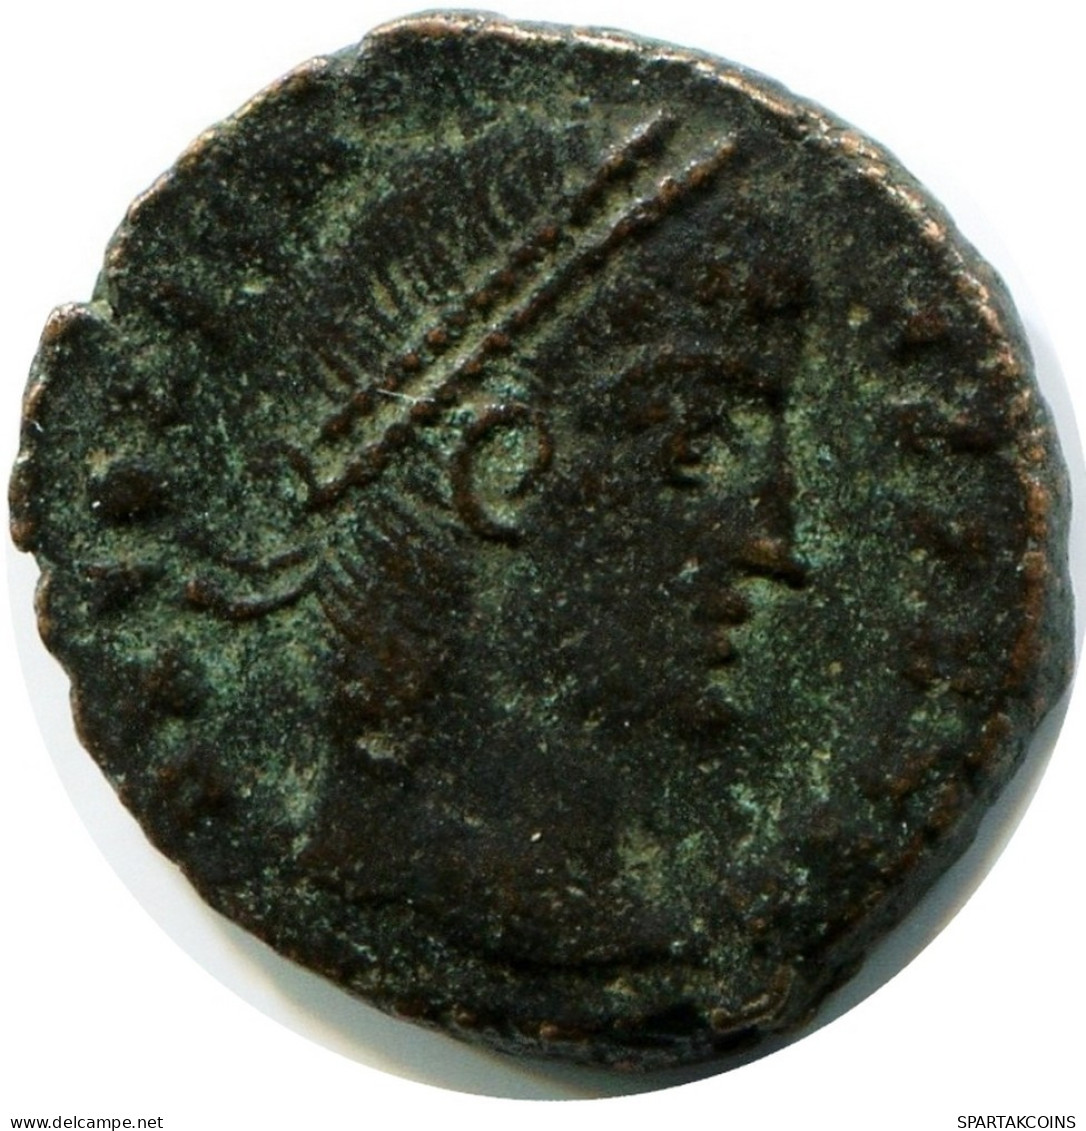 CONSTANS MINTED IN CYZICUS FROM THE ROYAL ONTARIO MUSEUM #ANC11591.14.D.A - El Imperio Christiano (307 / 363)